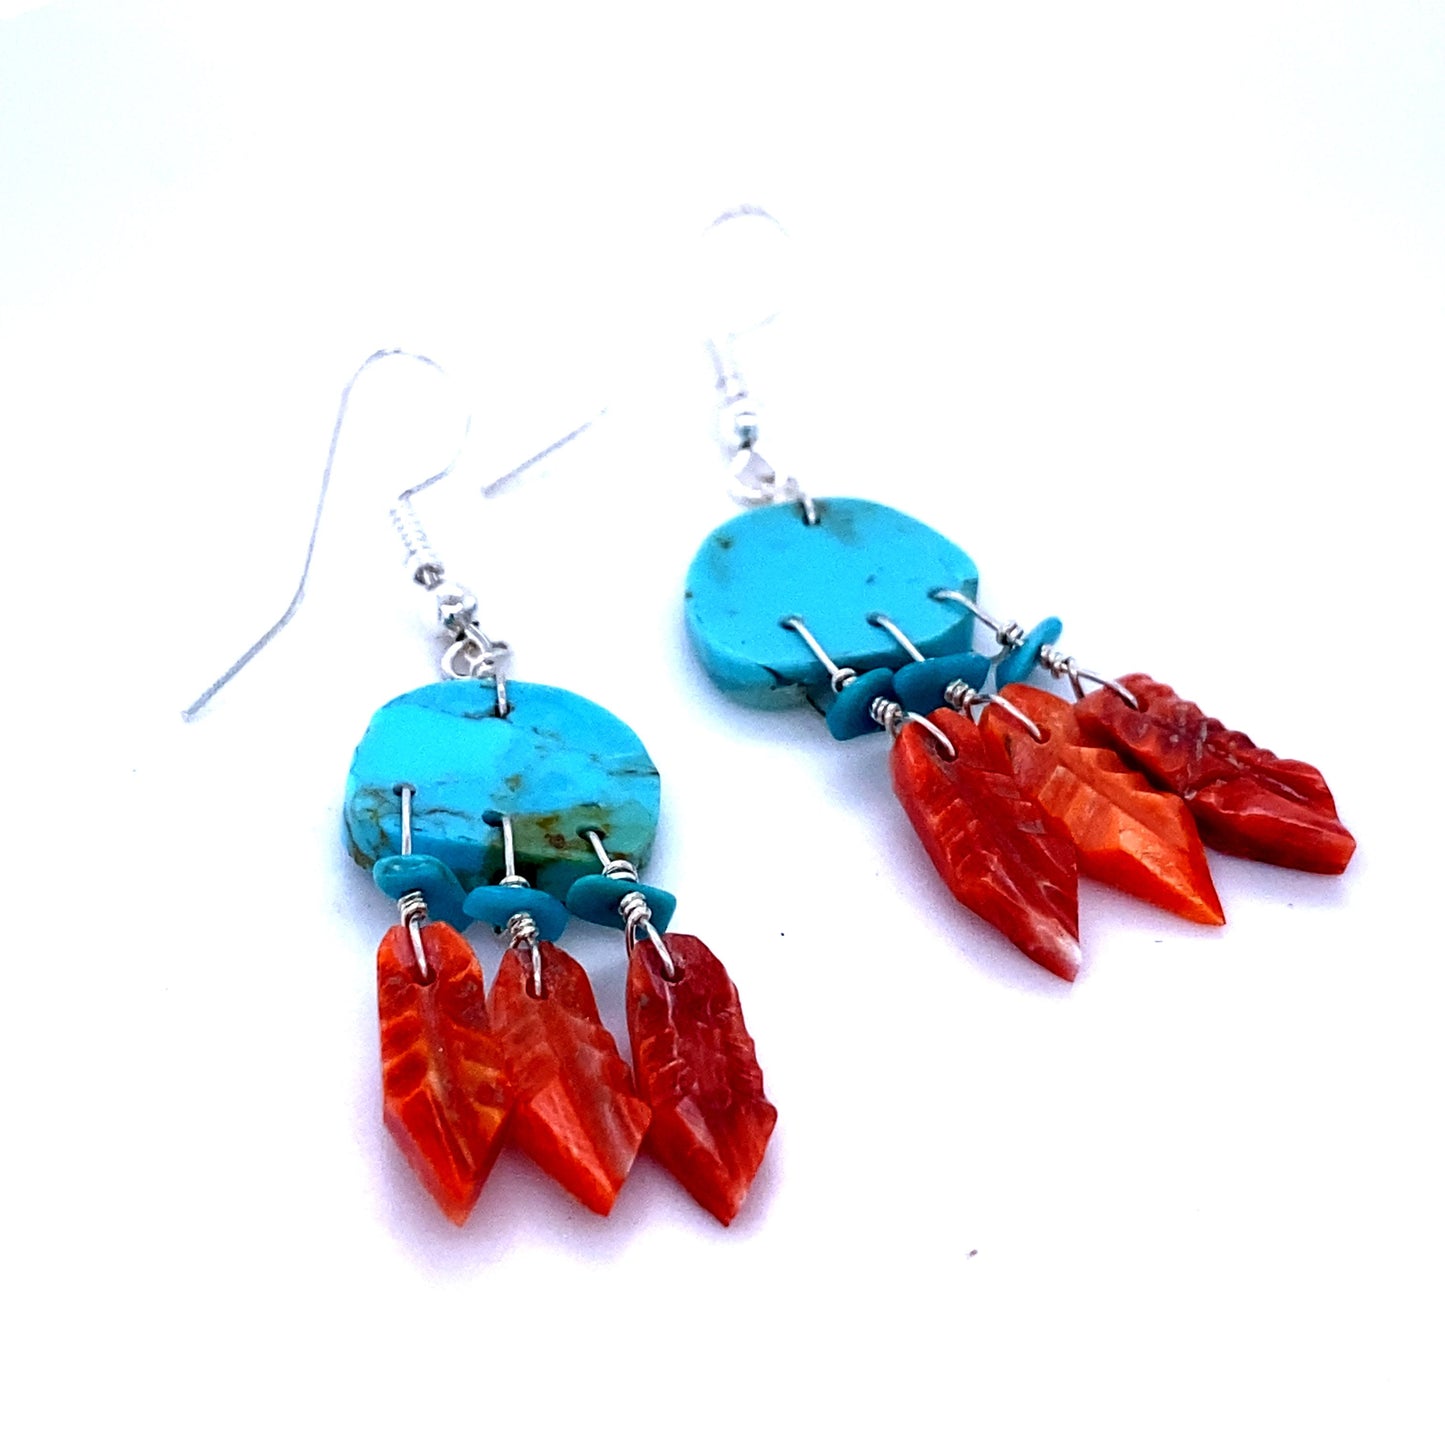 
                  
                    A pair of Handmade Earrings with 3 Small Stone Feathers, inspired by Native American culture, meticulously crafted by artisans, and created by Super Silver brand with vibrant red and orange feathers.
                  
                